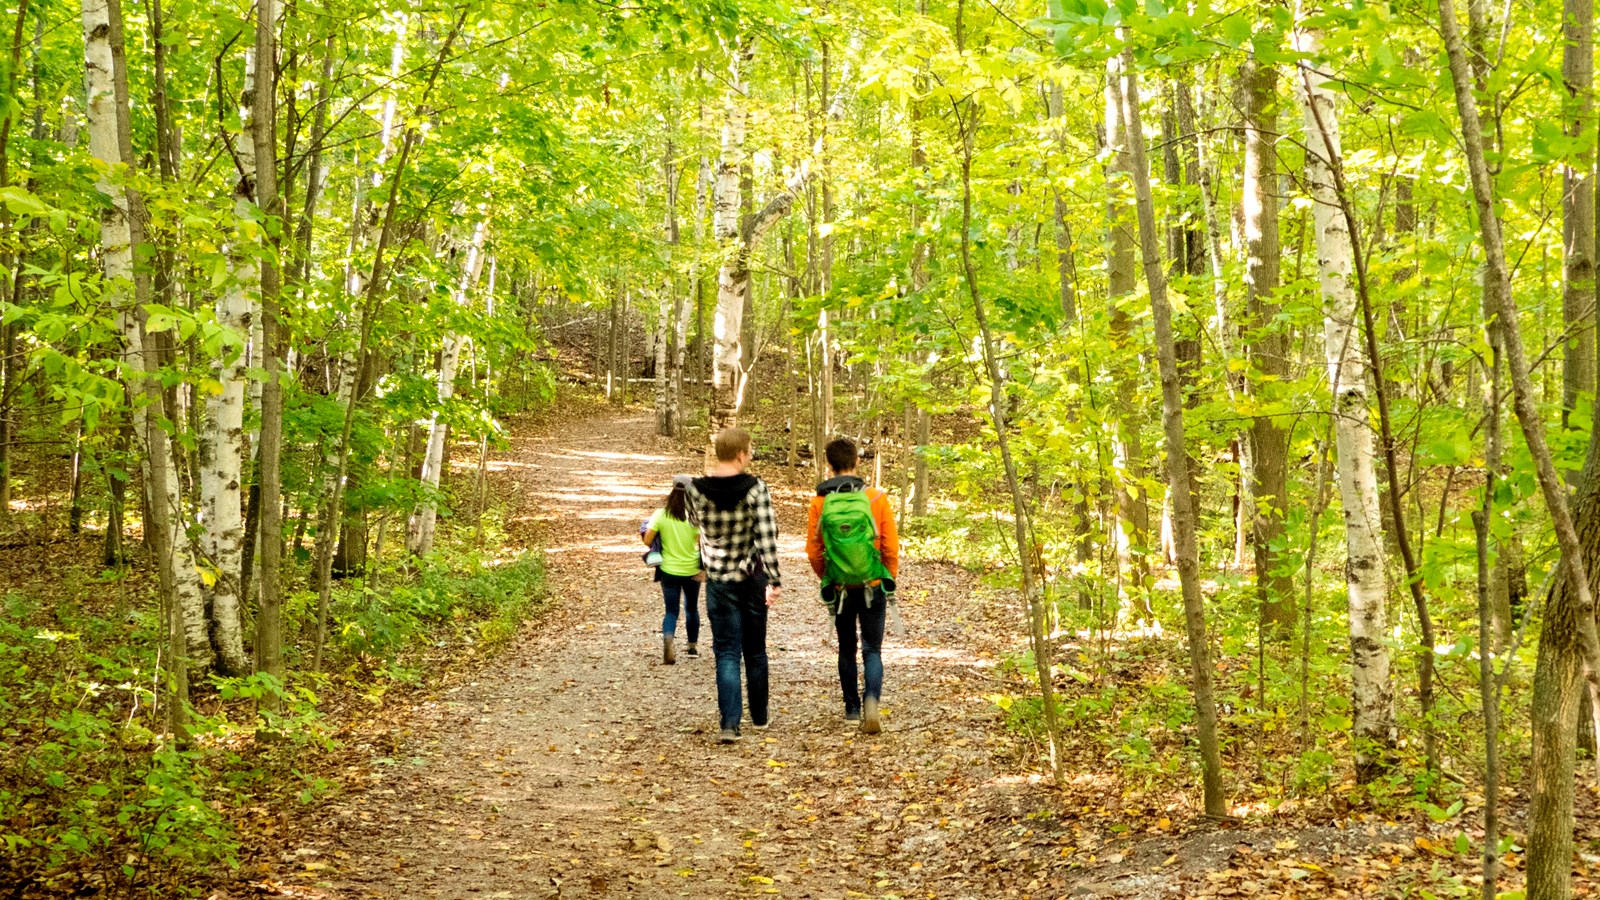 Hikers on the wide trail through early spring-green trees